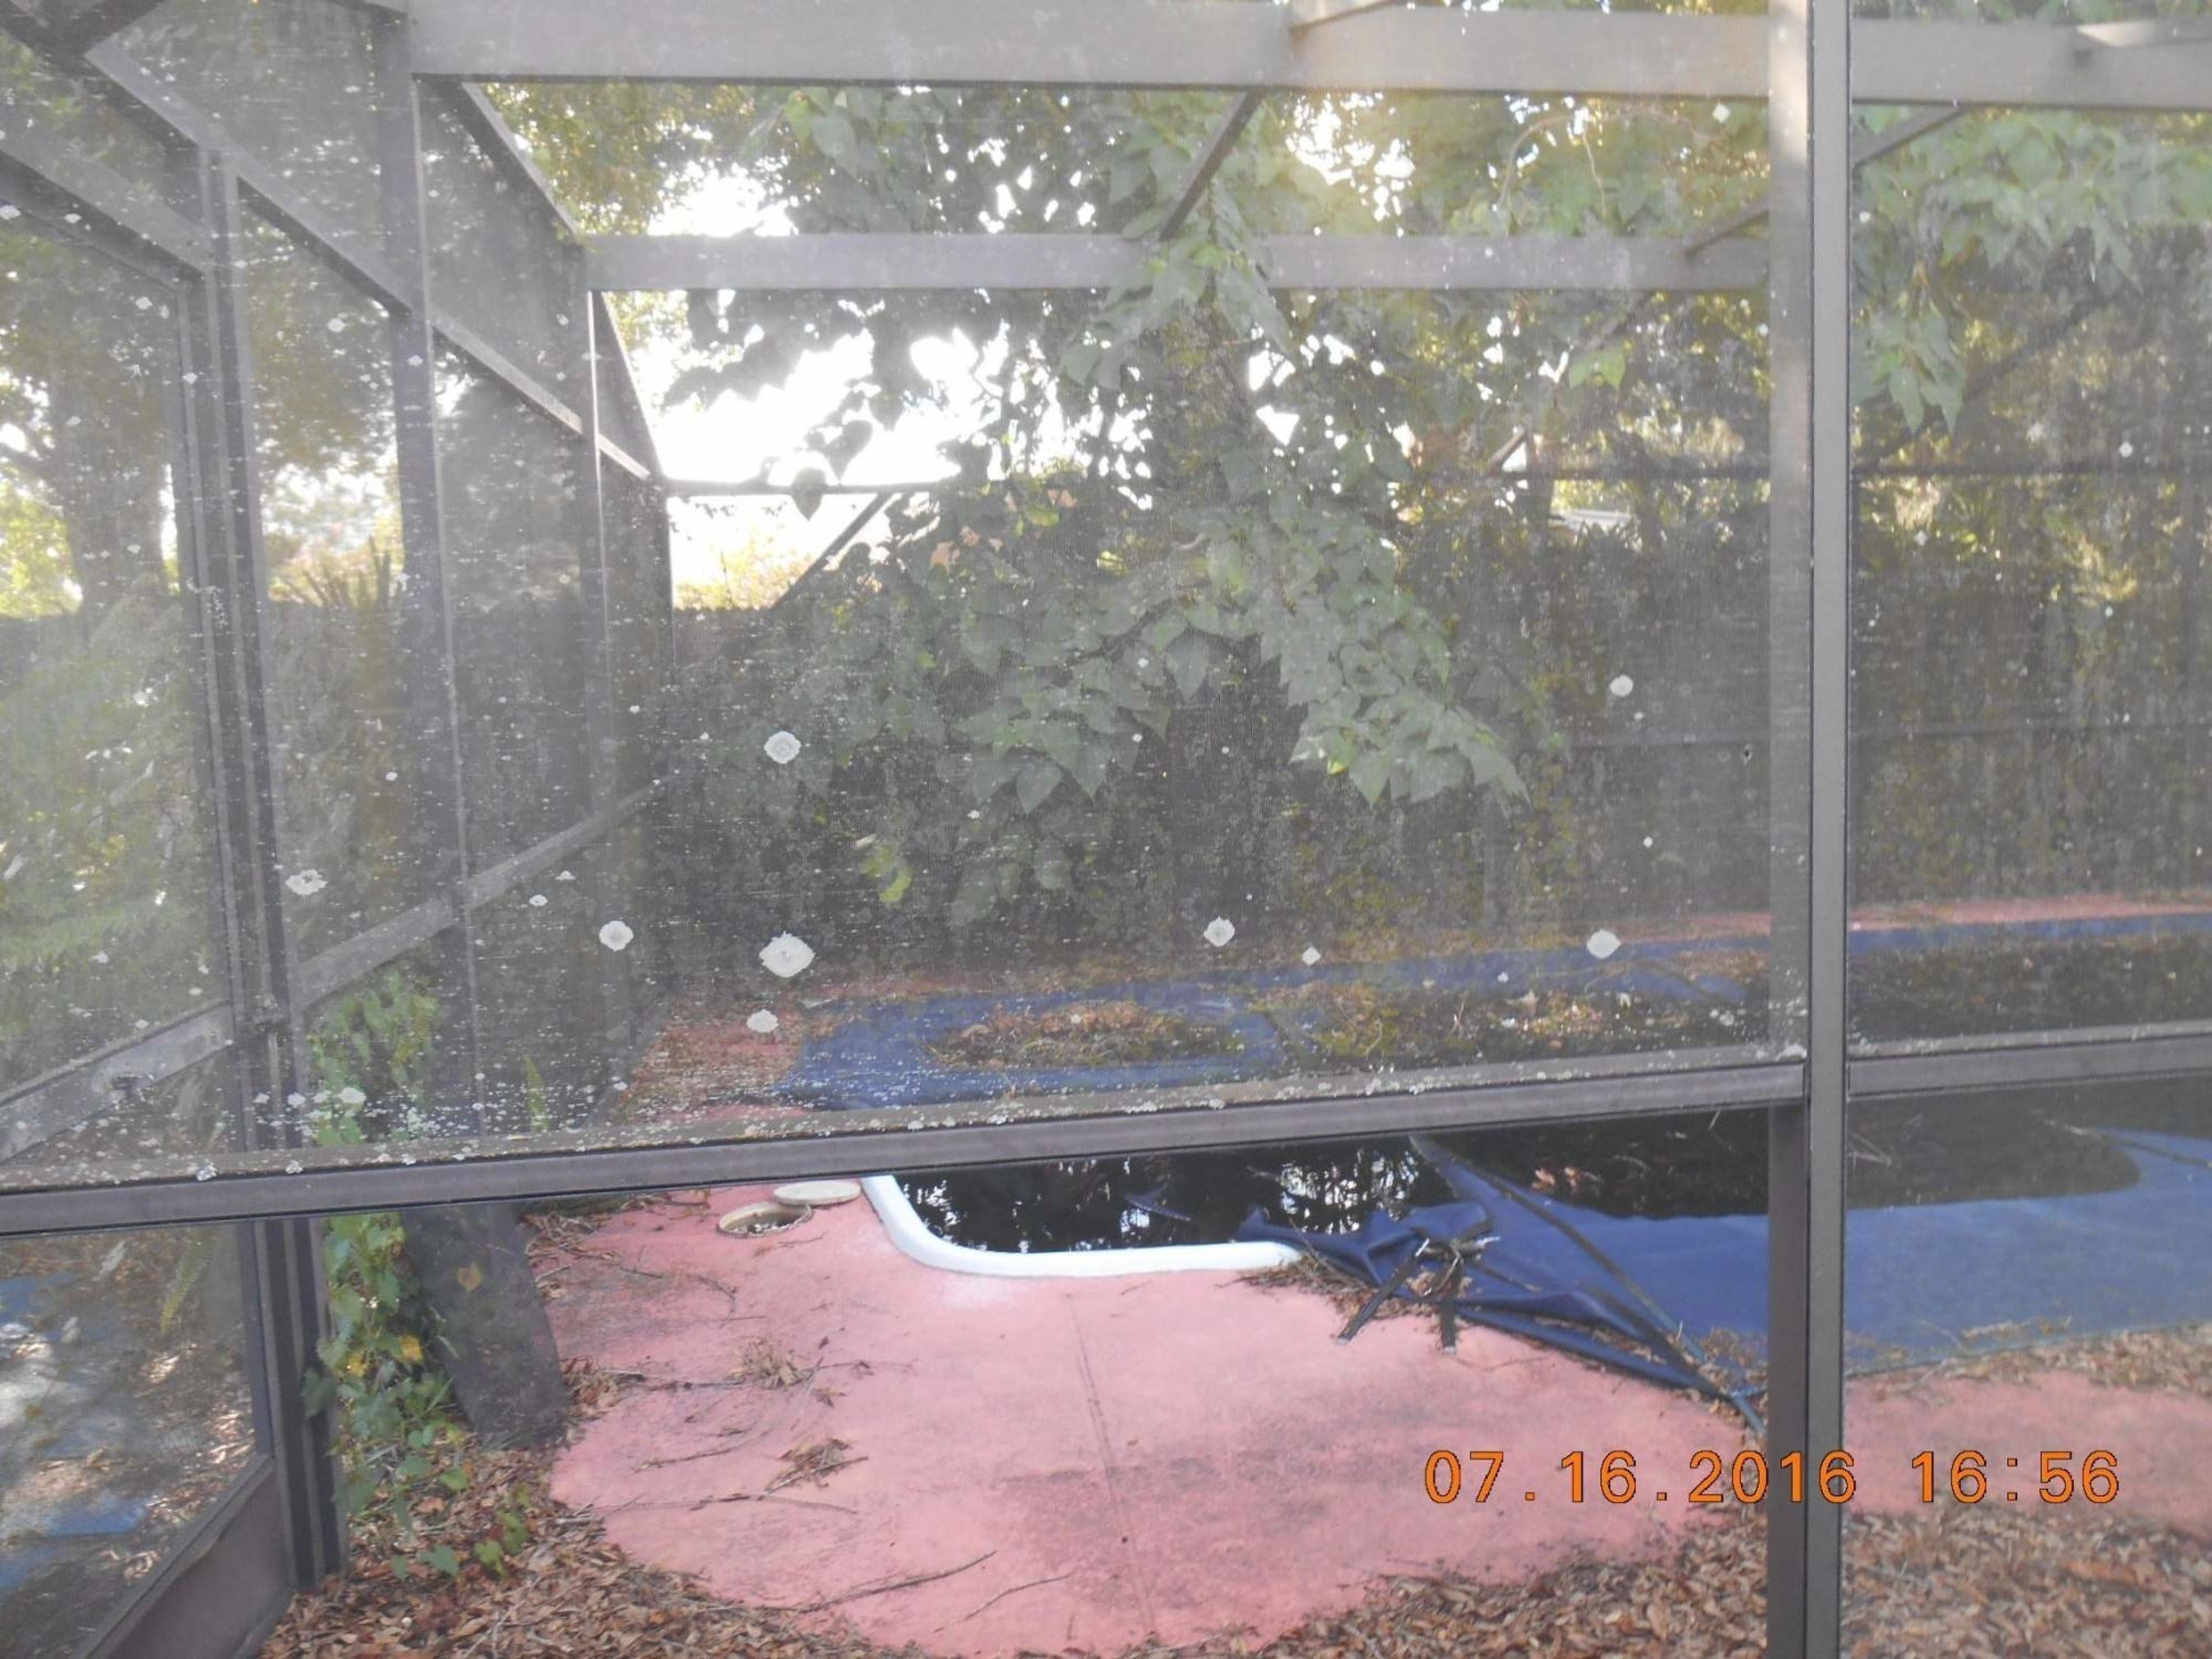 This Bank of America foreclosure in a Latino neighborhood in Orlando, FL, has an unsecured pool area.  Dirty standing water on the pool cover and inside the pool makes a perfect breeding ground for mosquitoes.